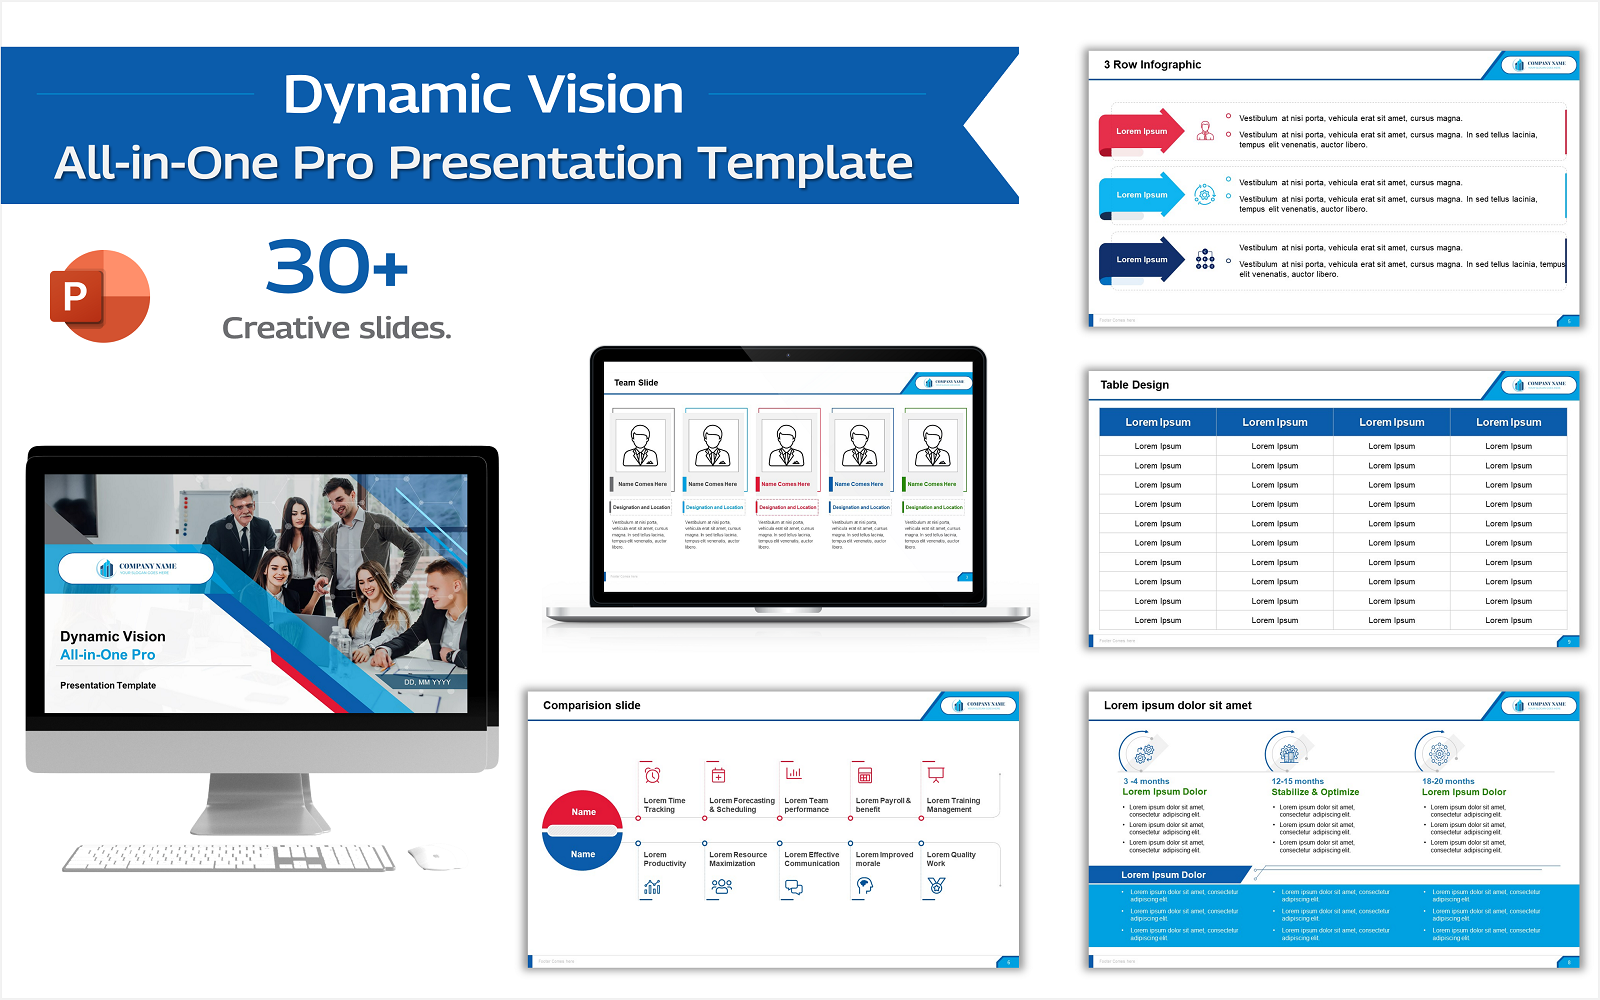 Dynamic Vision - All-in-One Pro Presentation Template